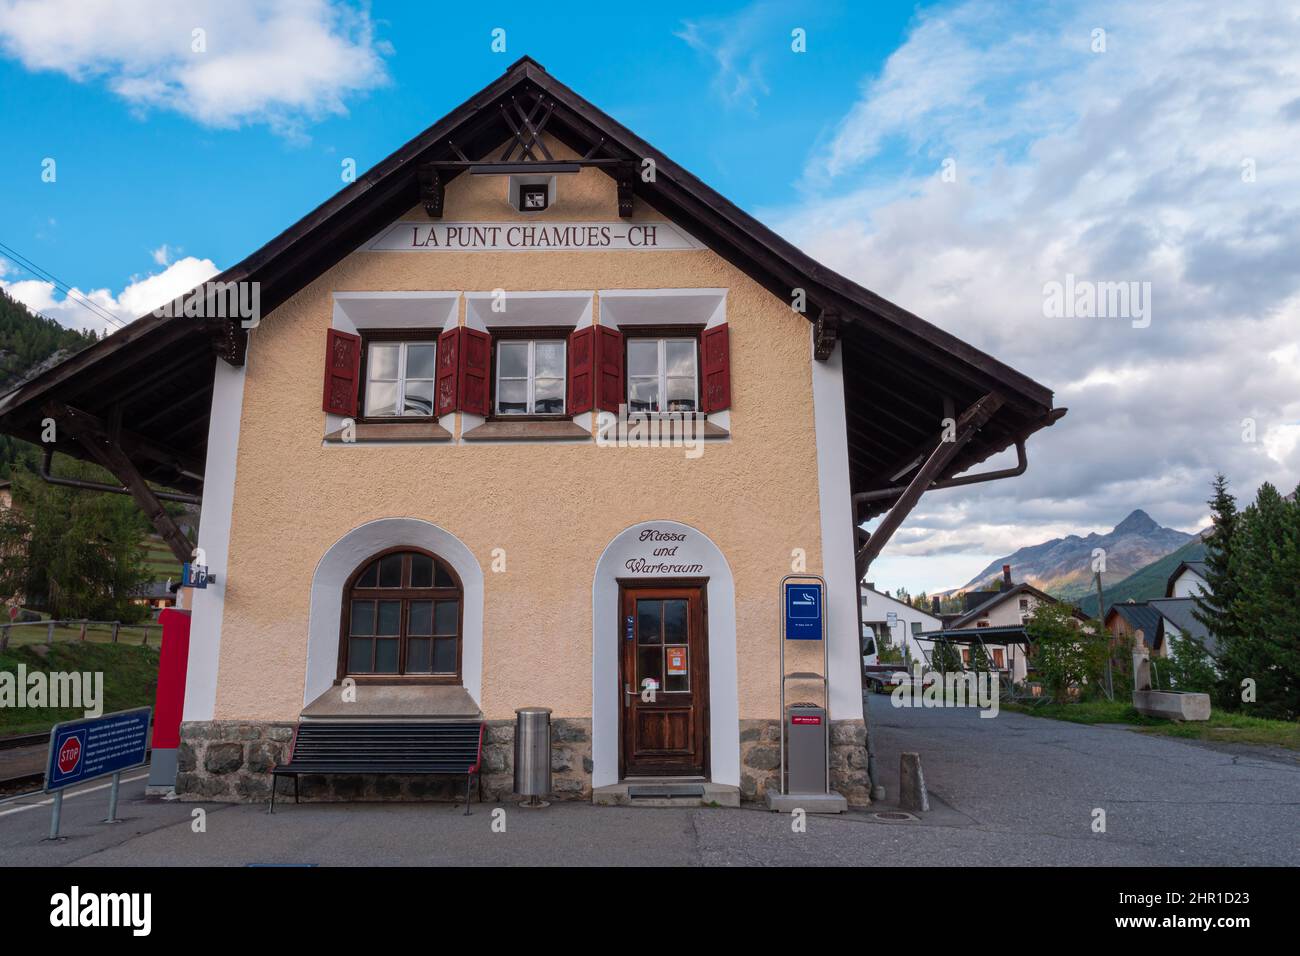 La Punt, Switzerland - September 29, 2021: A building of a local railway station at La Punt Chamues in swiss Engadine, canton Graubunden Stock Photo